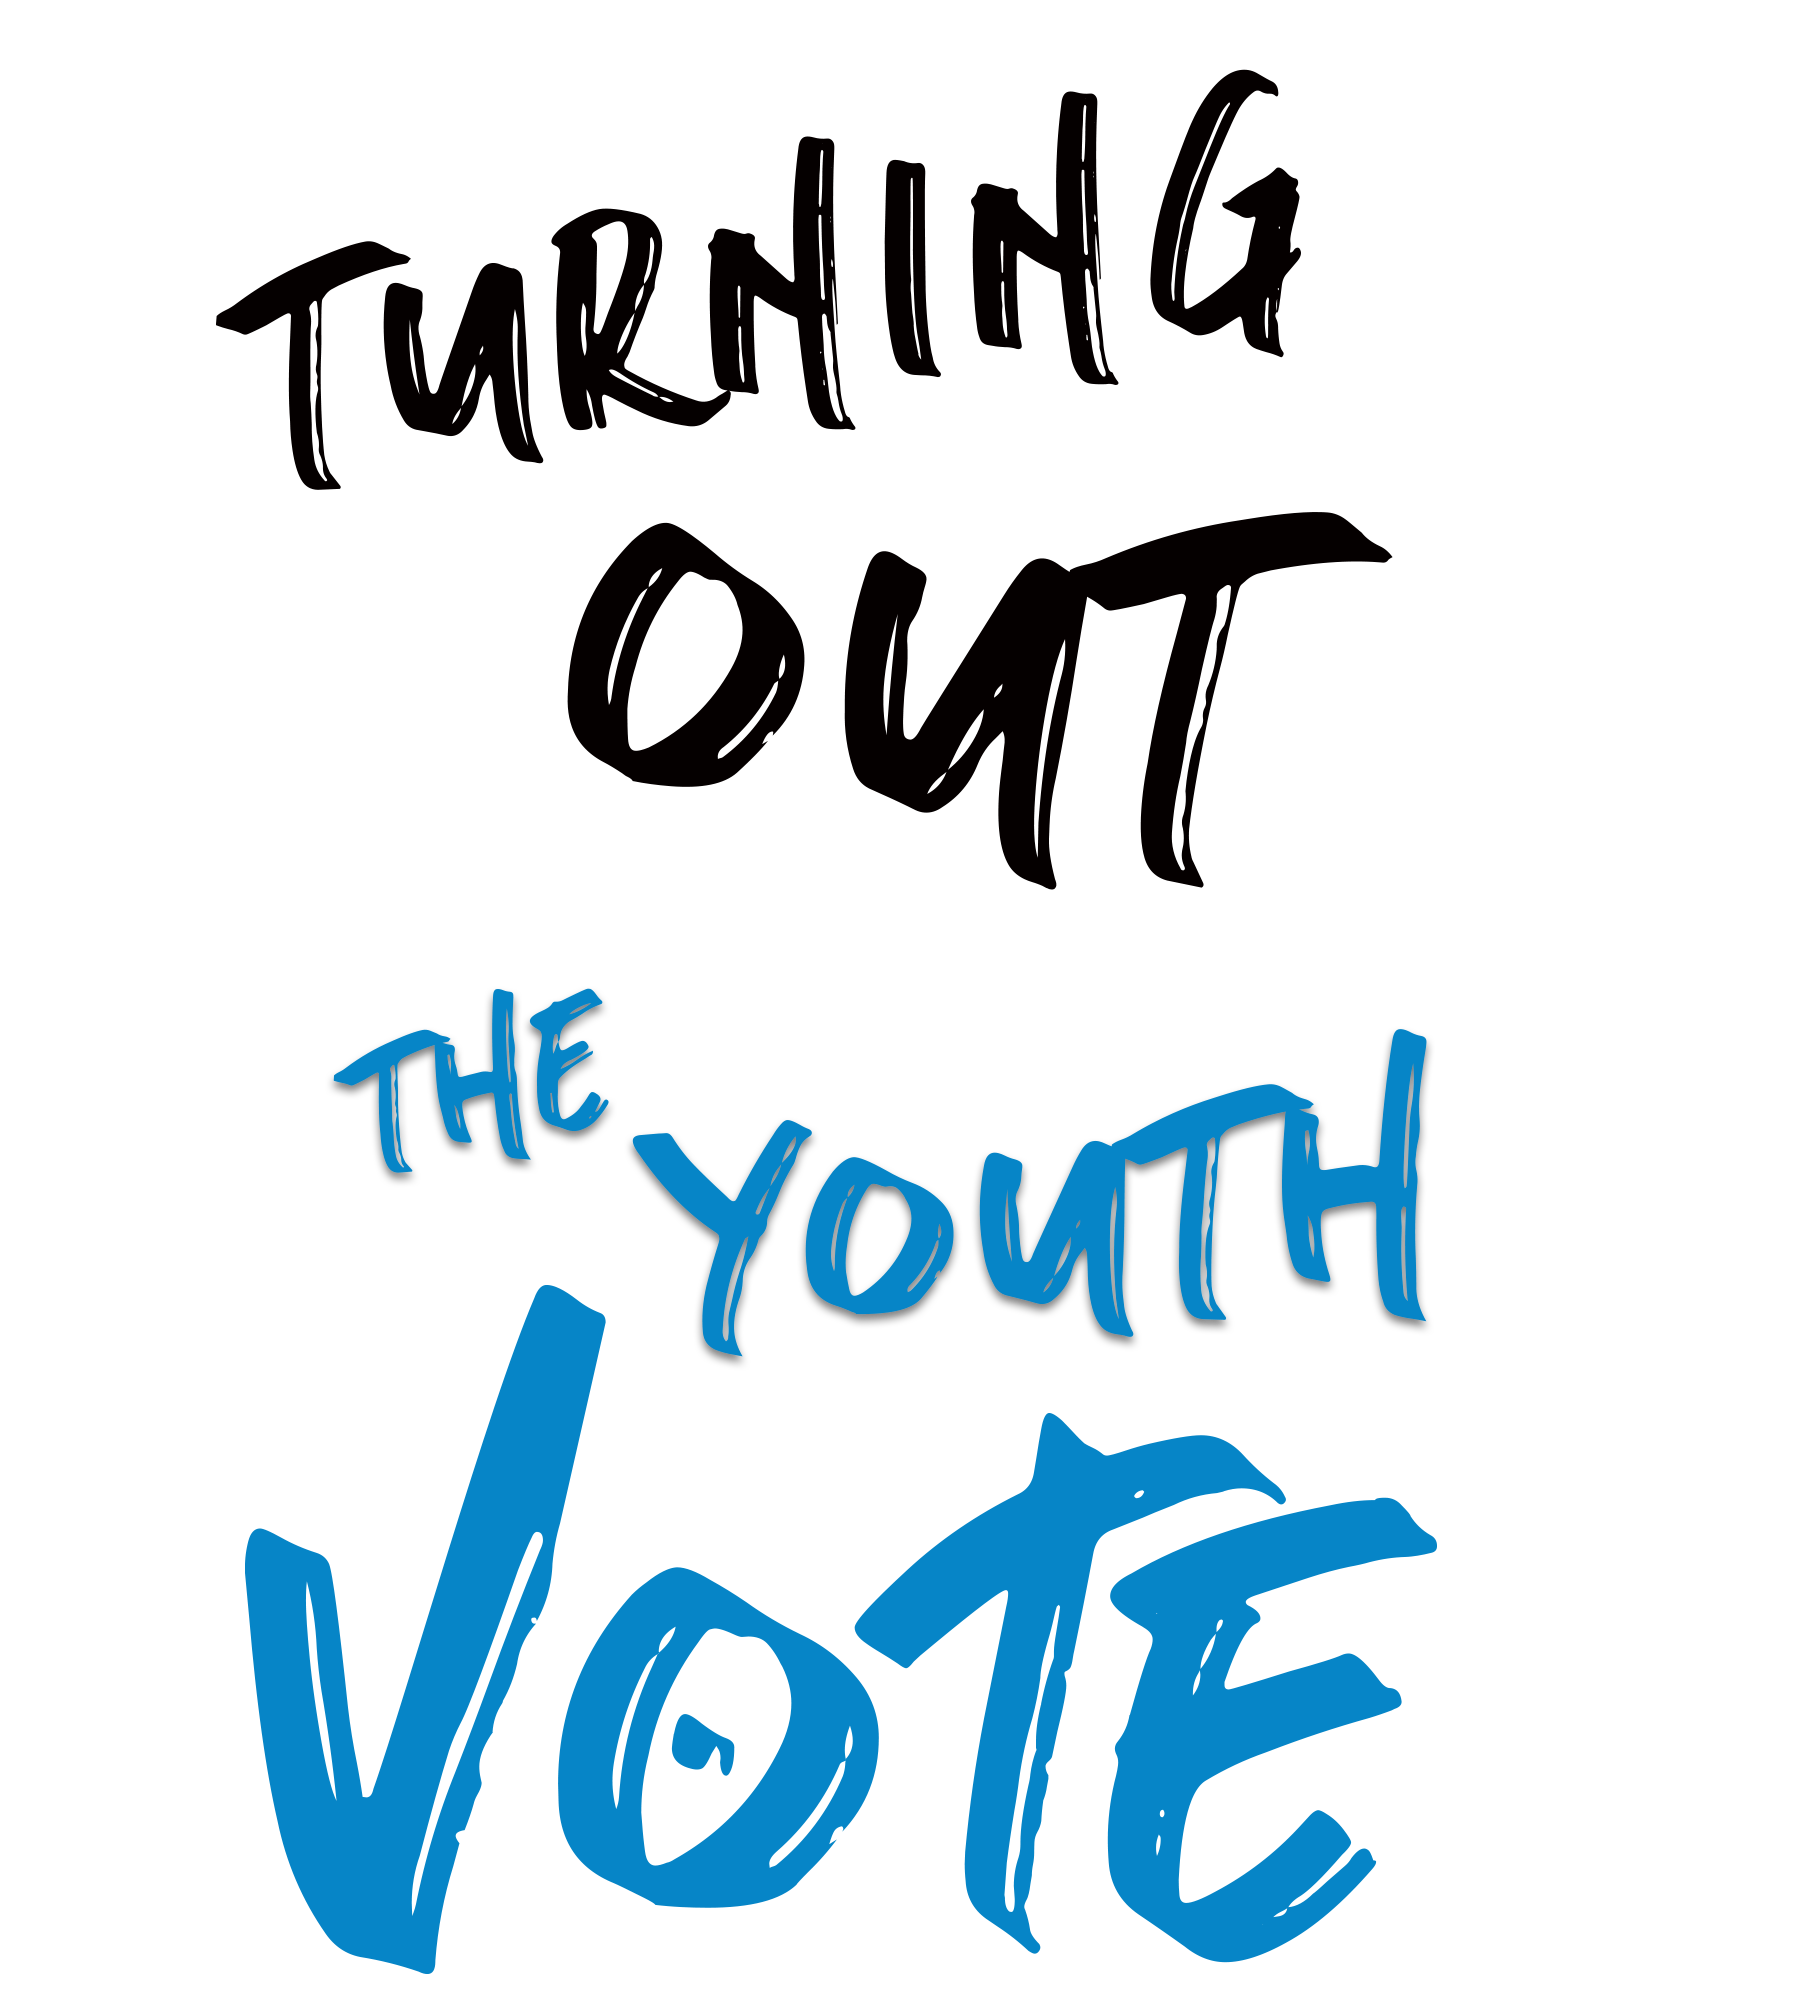 Turning Out: The Youth Vote Logo